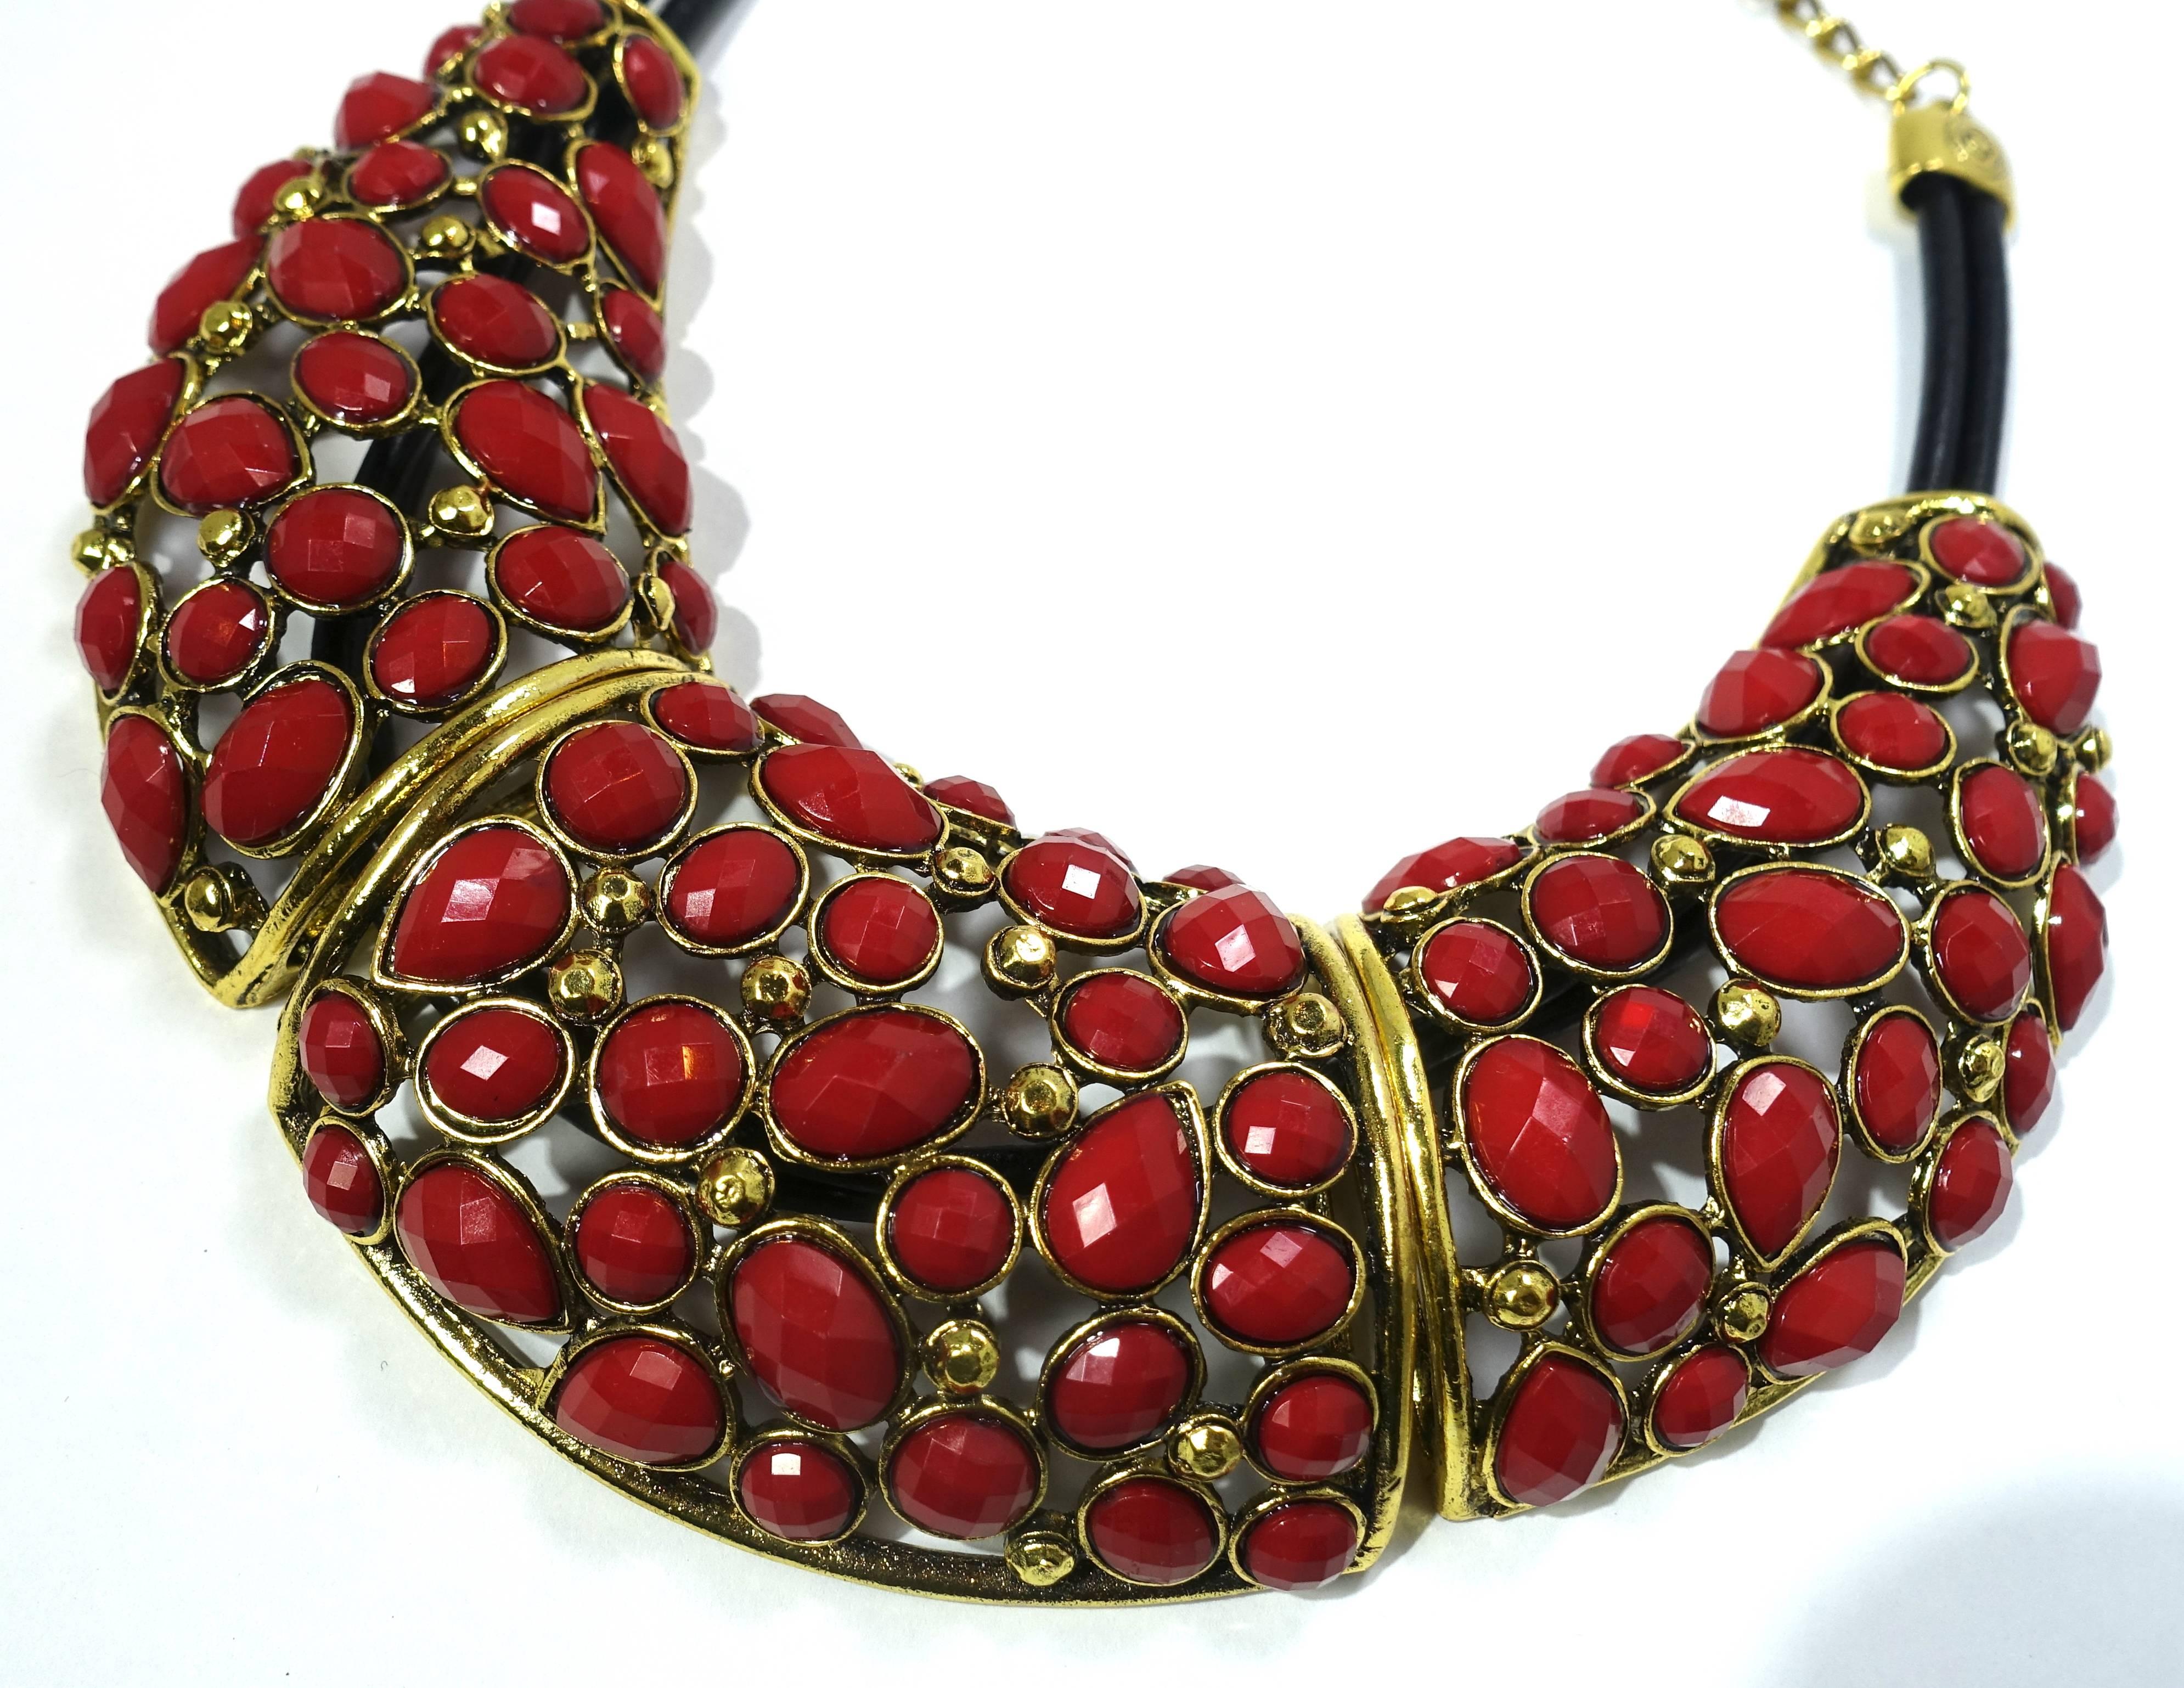 Although this necklace is unsigned, I had the exact same one in blue with his signature.  This Oscar de la Renta necklace has 3 segments with large red stones in a gold tone setting.  They are connected with a double leather rope, which connects to